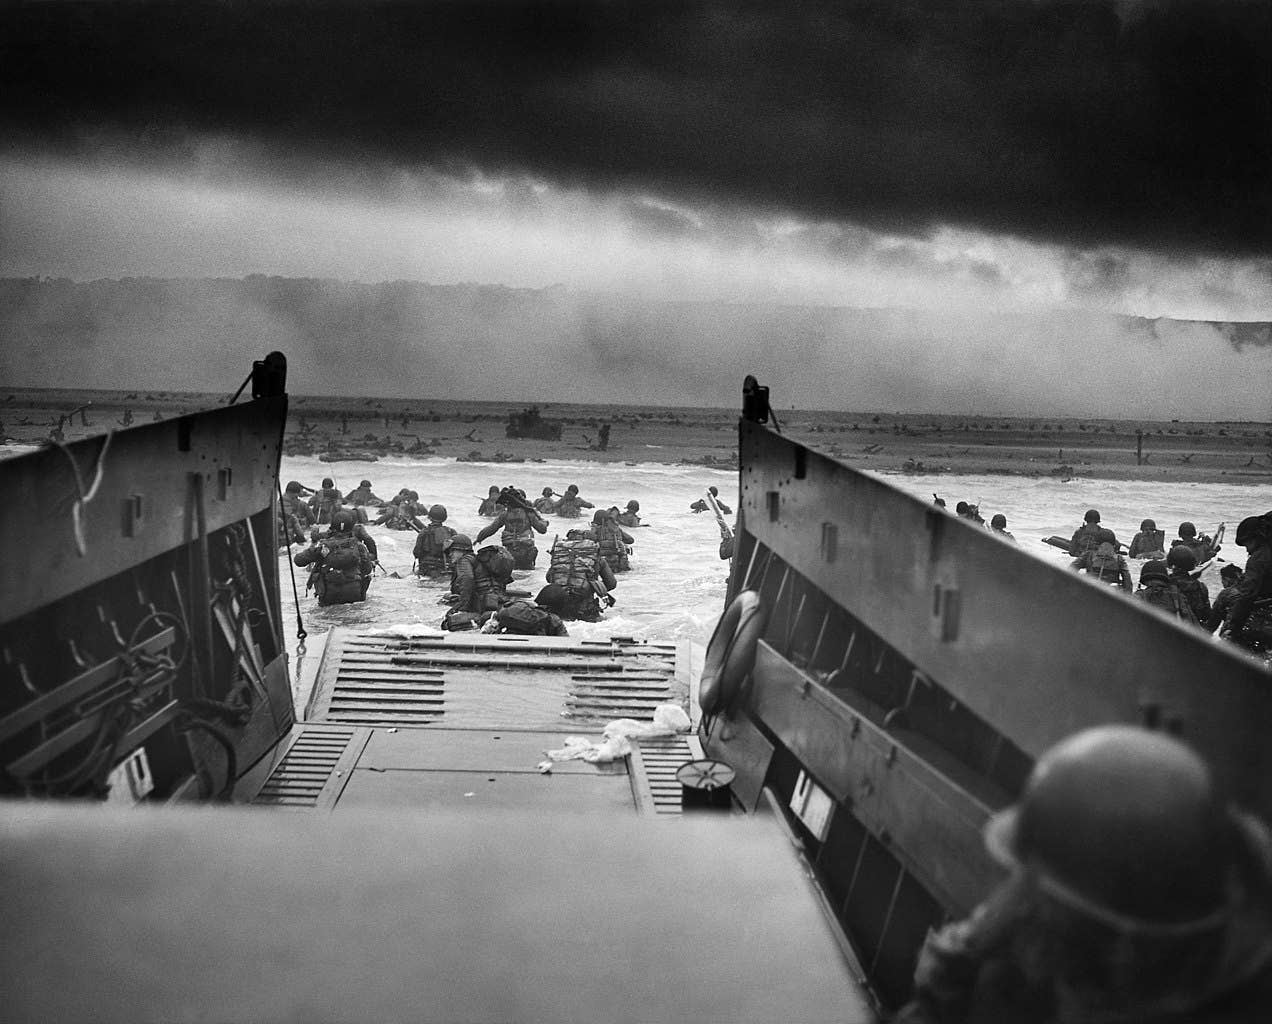  WWII: Europe: France; “Into the Jaws of Death — U.S. Troops wading through water and Nazi gunfire”, circa 1944-06-06.